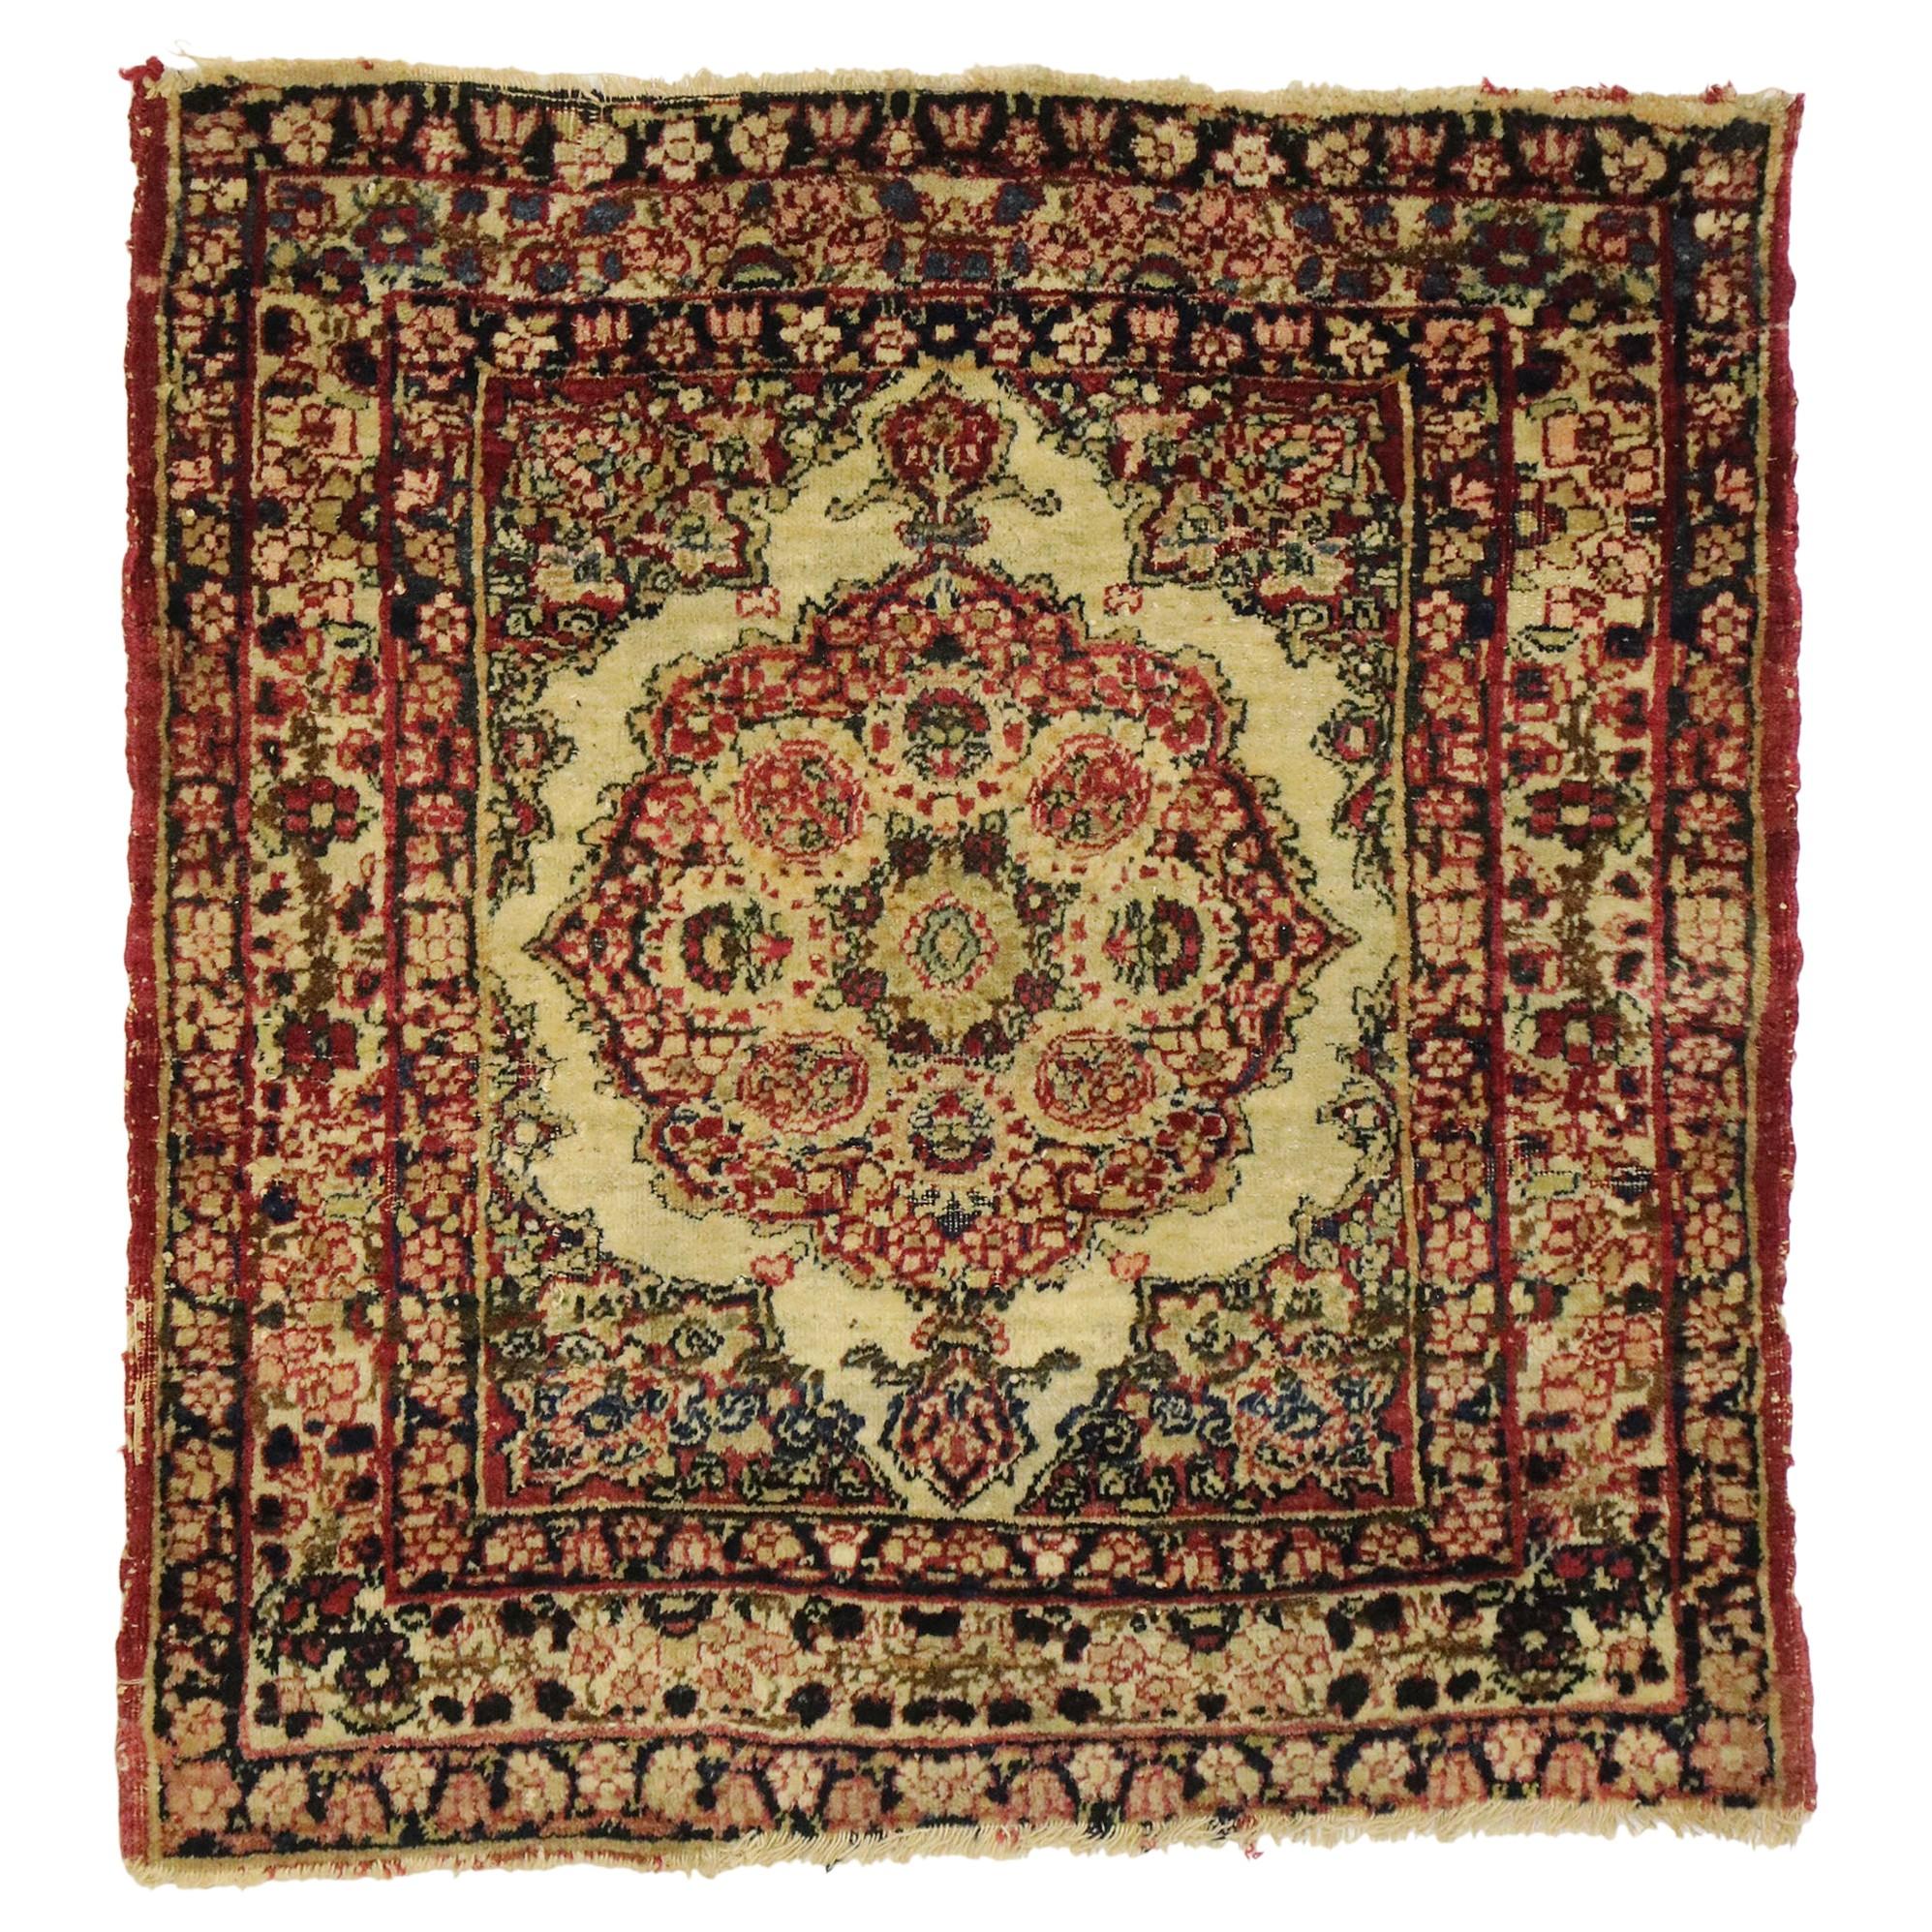 Antique Persian Kermanshah Scatter Rug with Old World Victorian Style